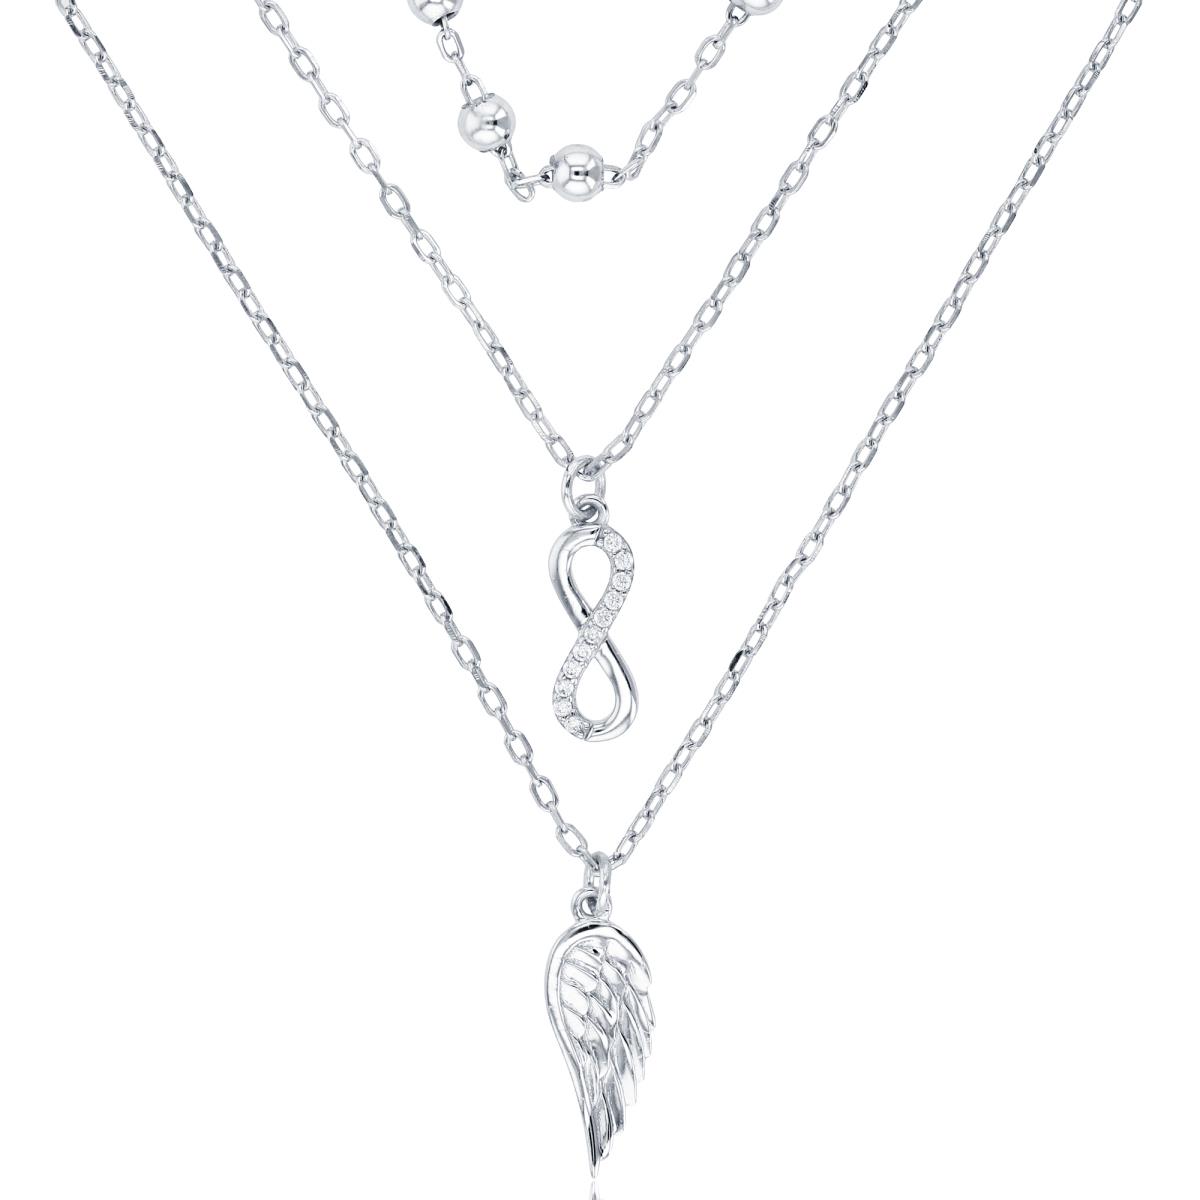 Sterling Silver Rhodium Rnd CZ Infinity/3mm Rnd Beads & Textured Wing 16"/17"/18"+2"Layered Necklace